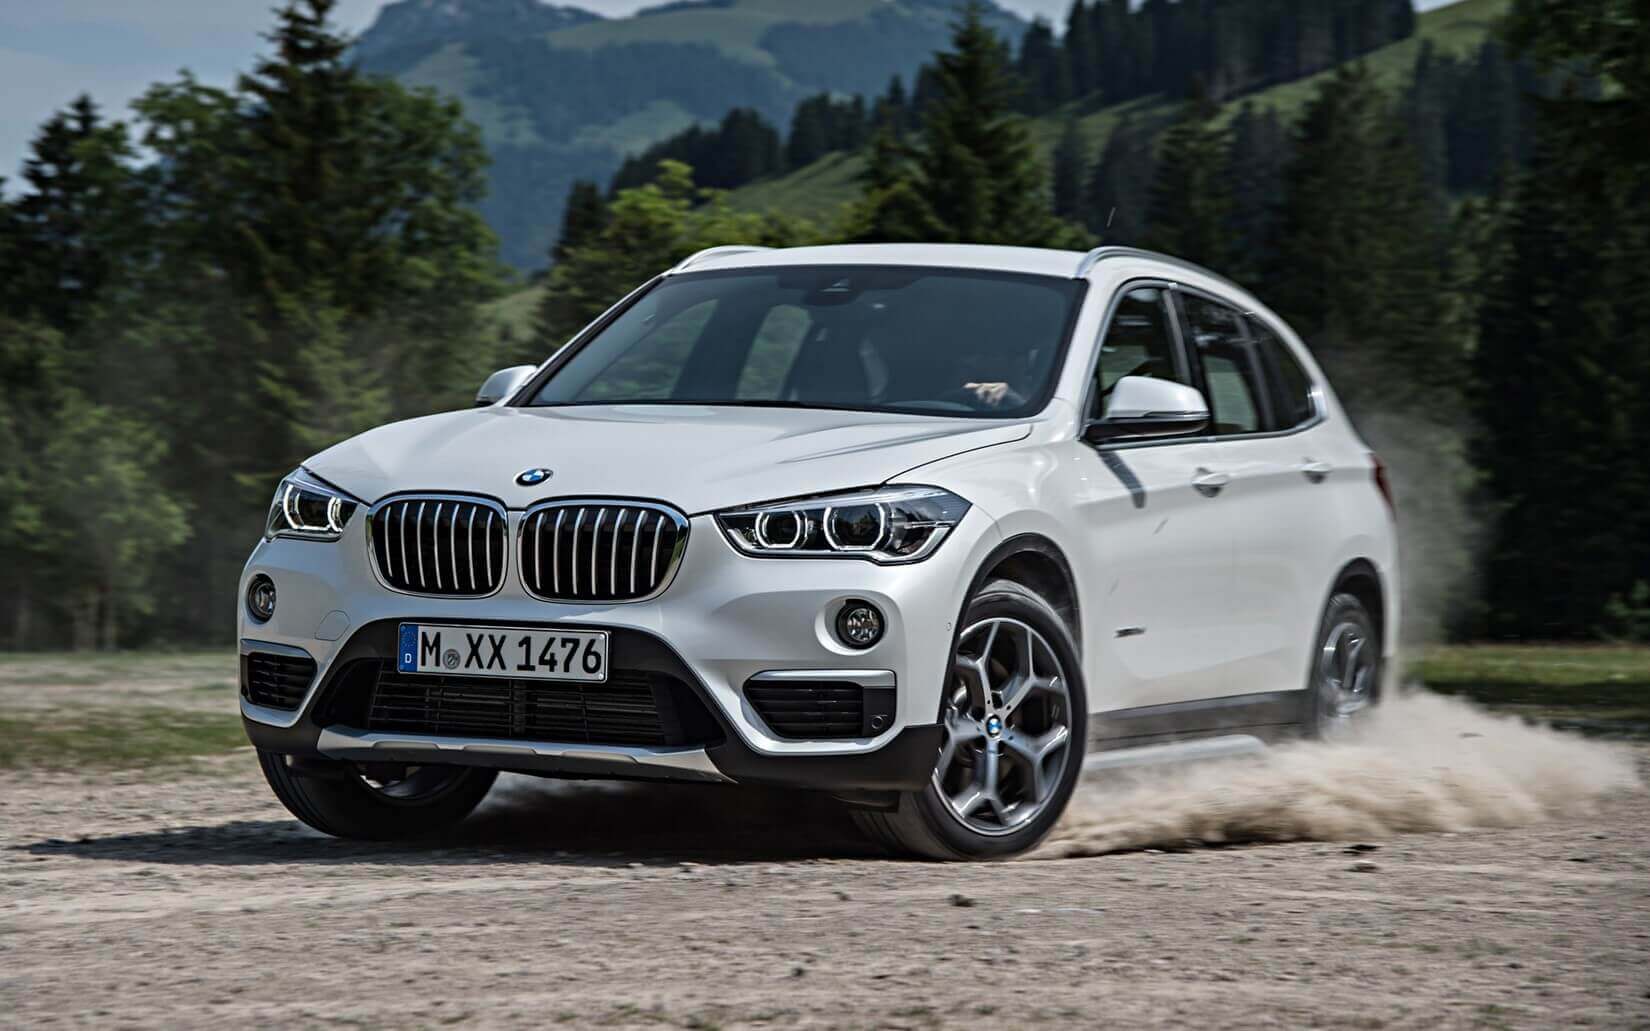 BMW X1. Engine HD Wallpaper. Car Release Preview